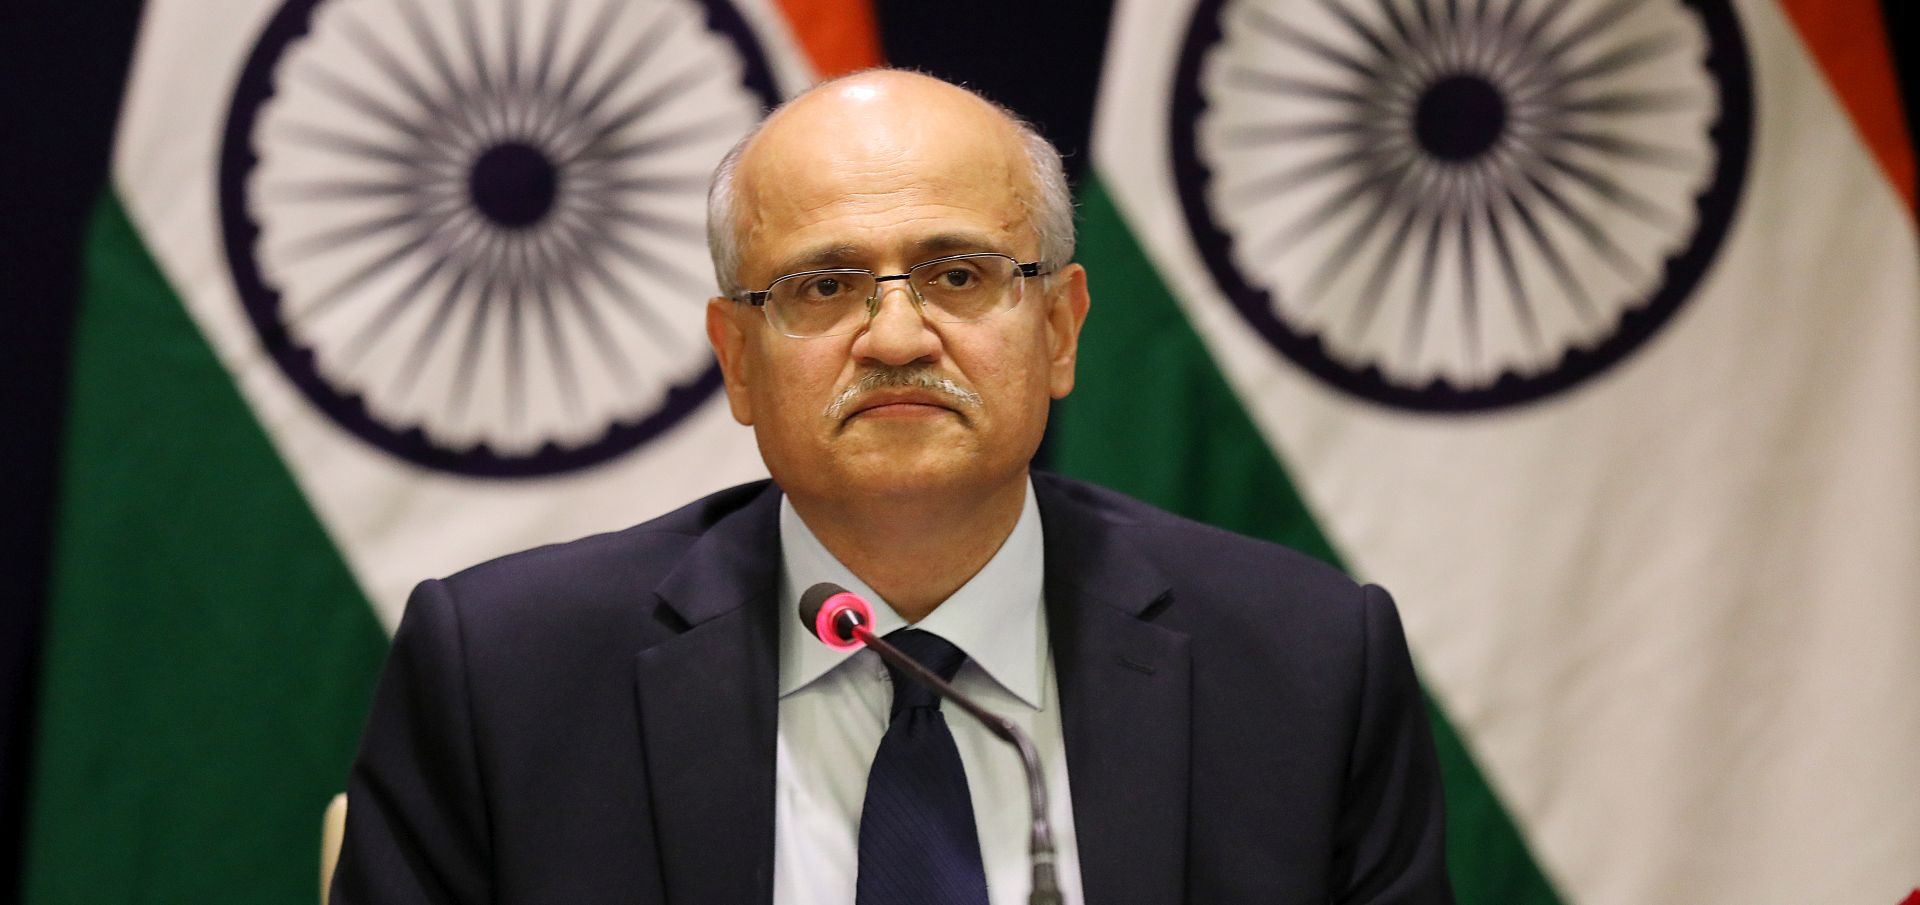 epa07398057 Indian Foreign Sectary Vijay Keshav Gokhale speaks to the media about an Indian Air Force strike across the Line of Control (LoC) near Pakistan; in New Delhi, India, 26 February 2019. According to media reports on 26 February 2019, the Indian Air Force carried out air strikes with 12 Mirage jets, which dropped 1,000 kilogram bombs on an alleged terrorist camp across the Line of Control (LoC) near Pakistan. The air strikes occurred two weeks after a suicide bomber from the Pakistan-based Jaish-e-Mohammed group detonated a car bomb next to a security convoy traveling in Pulwama, killing over 40 Central Reserve Police Force (CRPF) soldiers.  EPA/RAJAT GUPTA